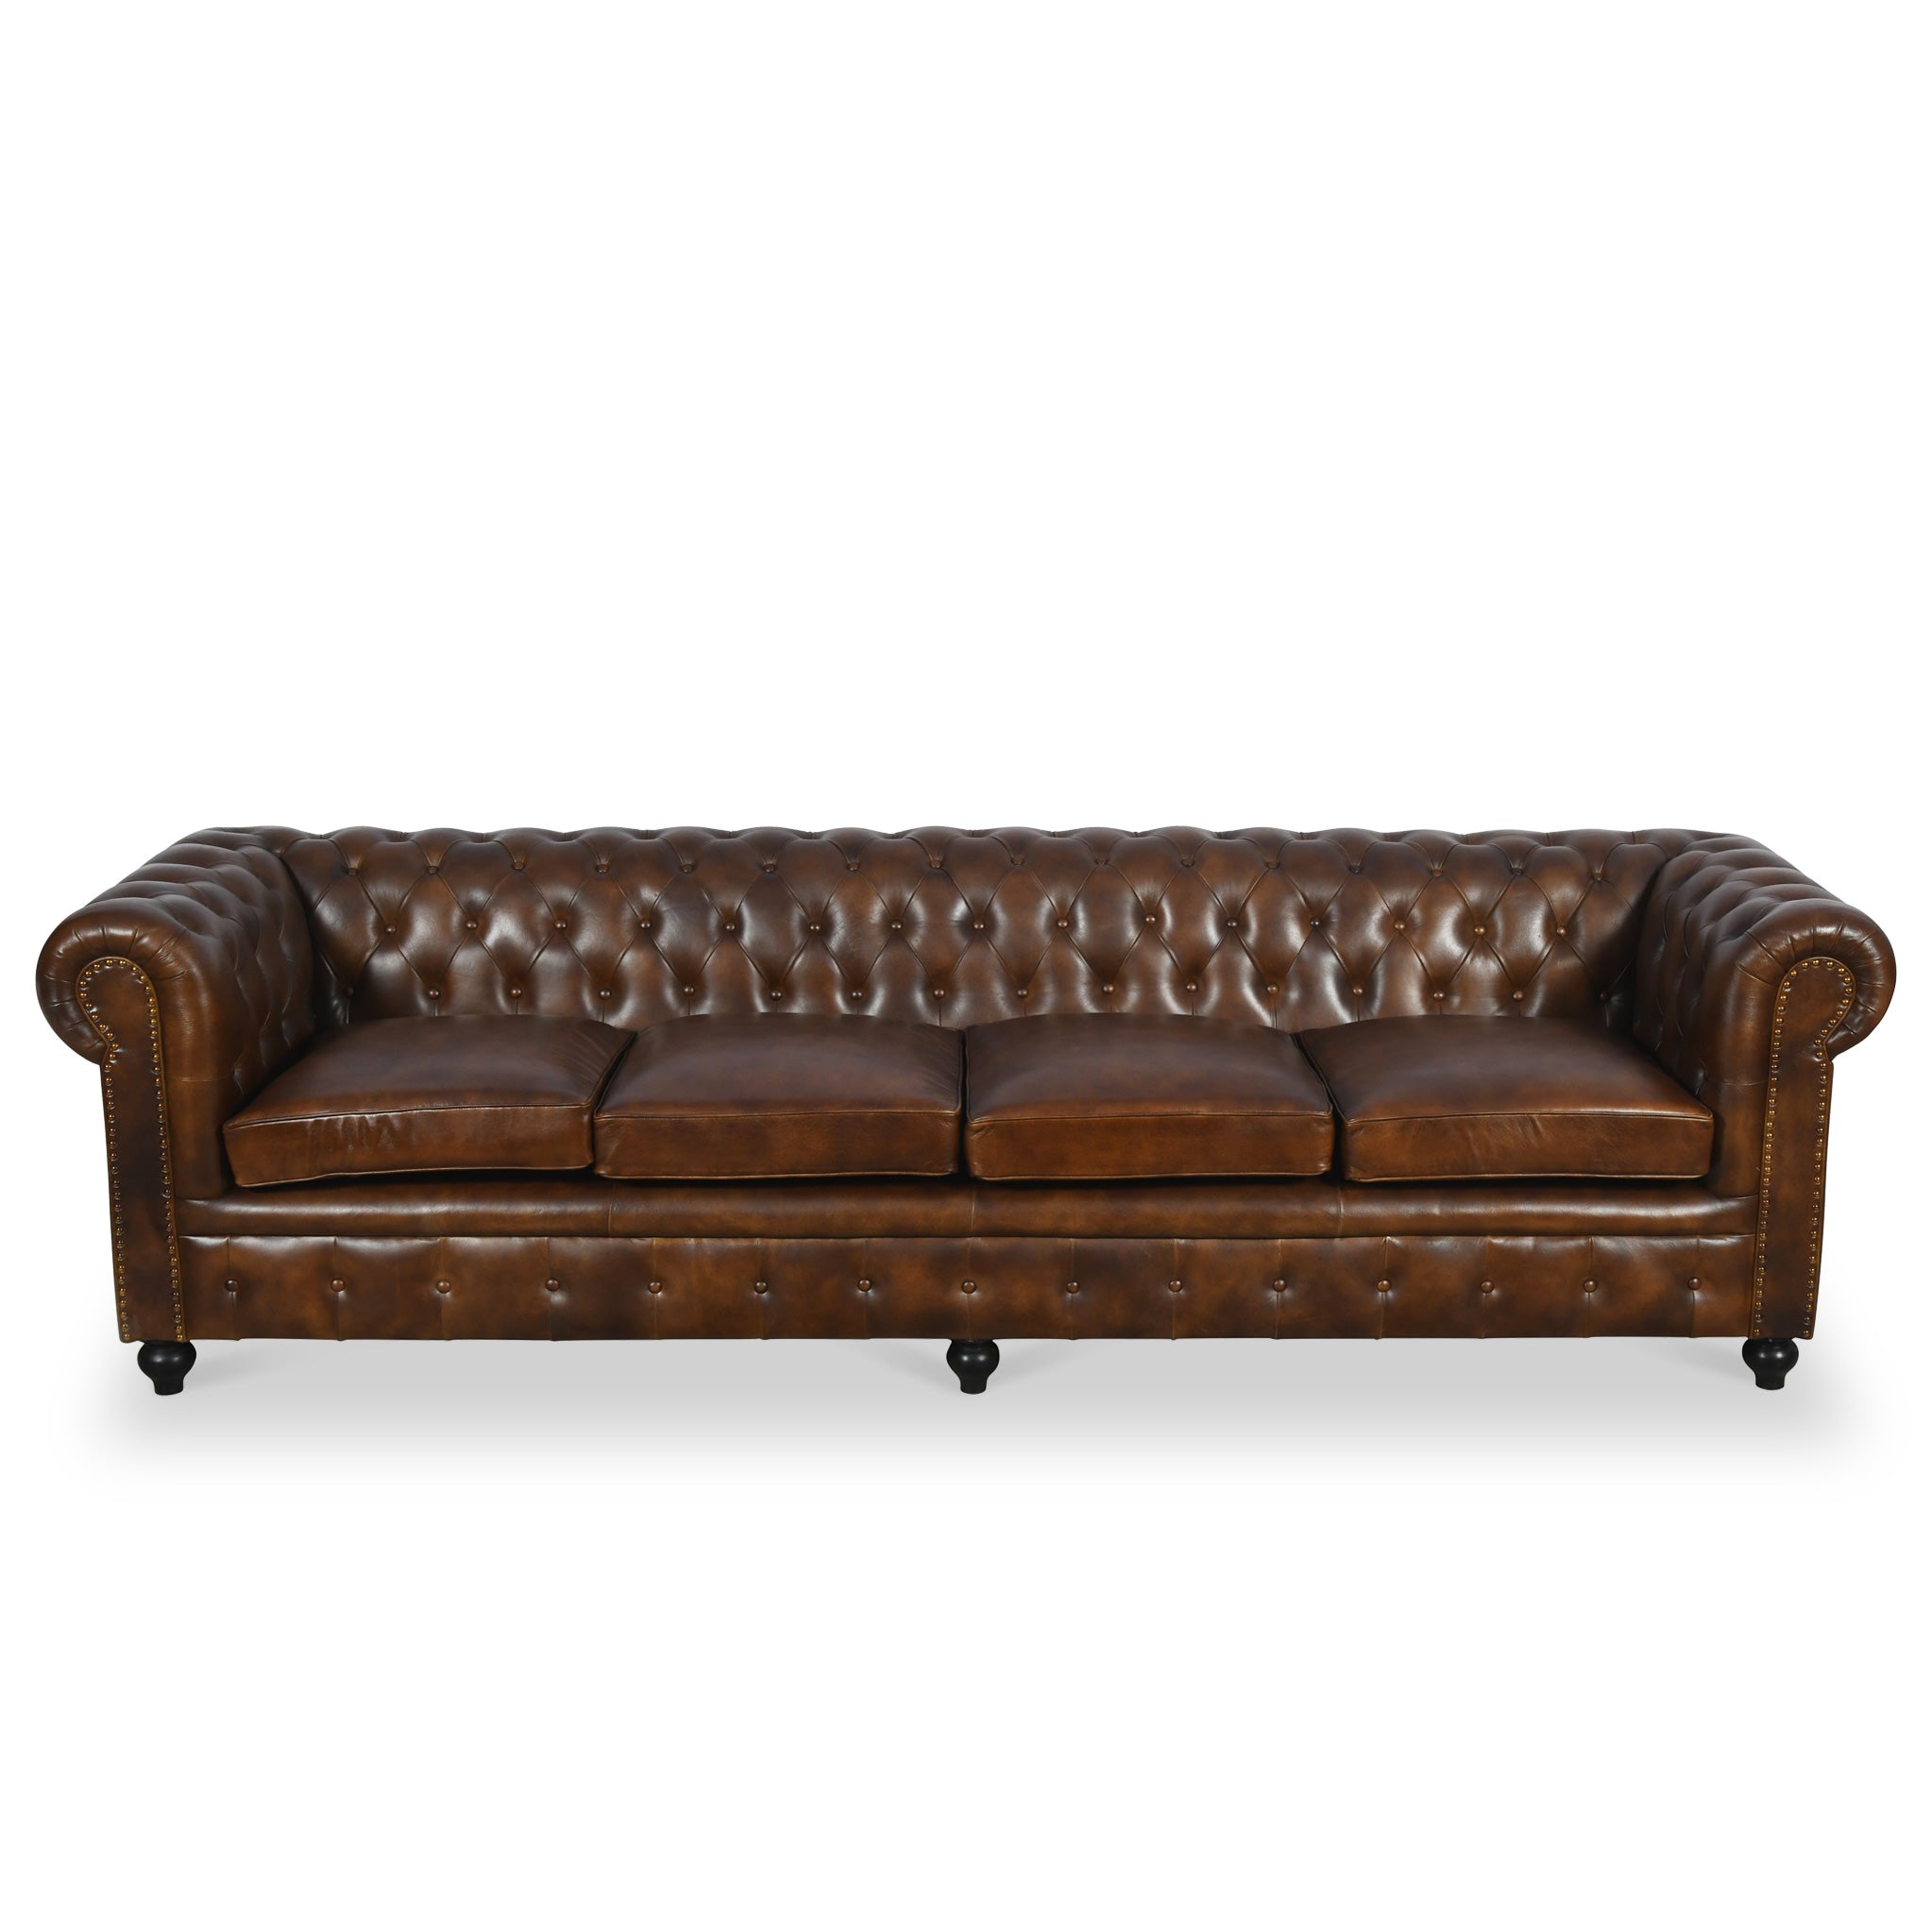 Nina Real Leather Chesterfield 4 Seater Sofa Roseland